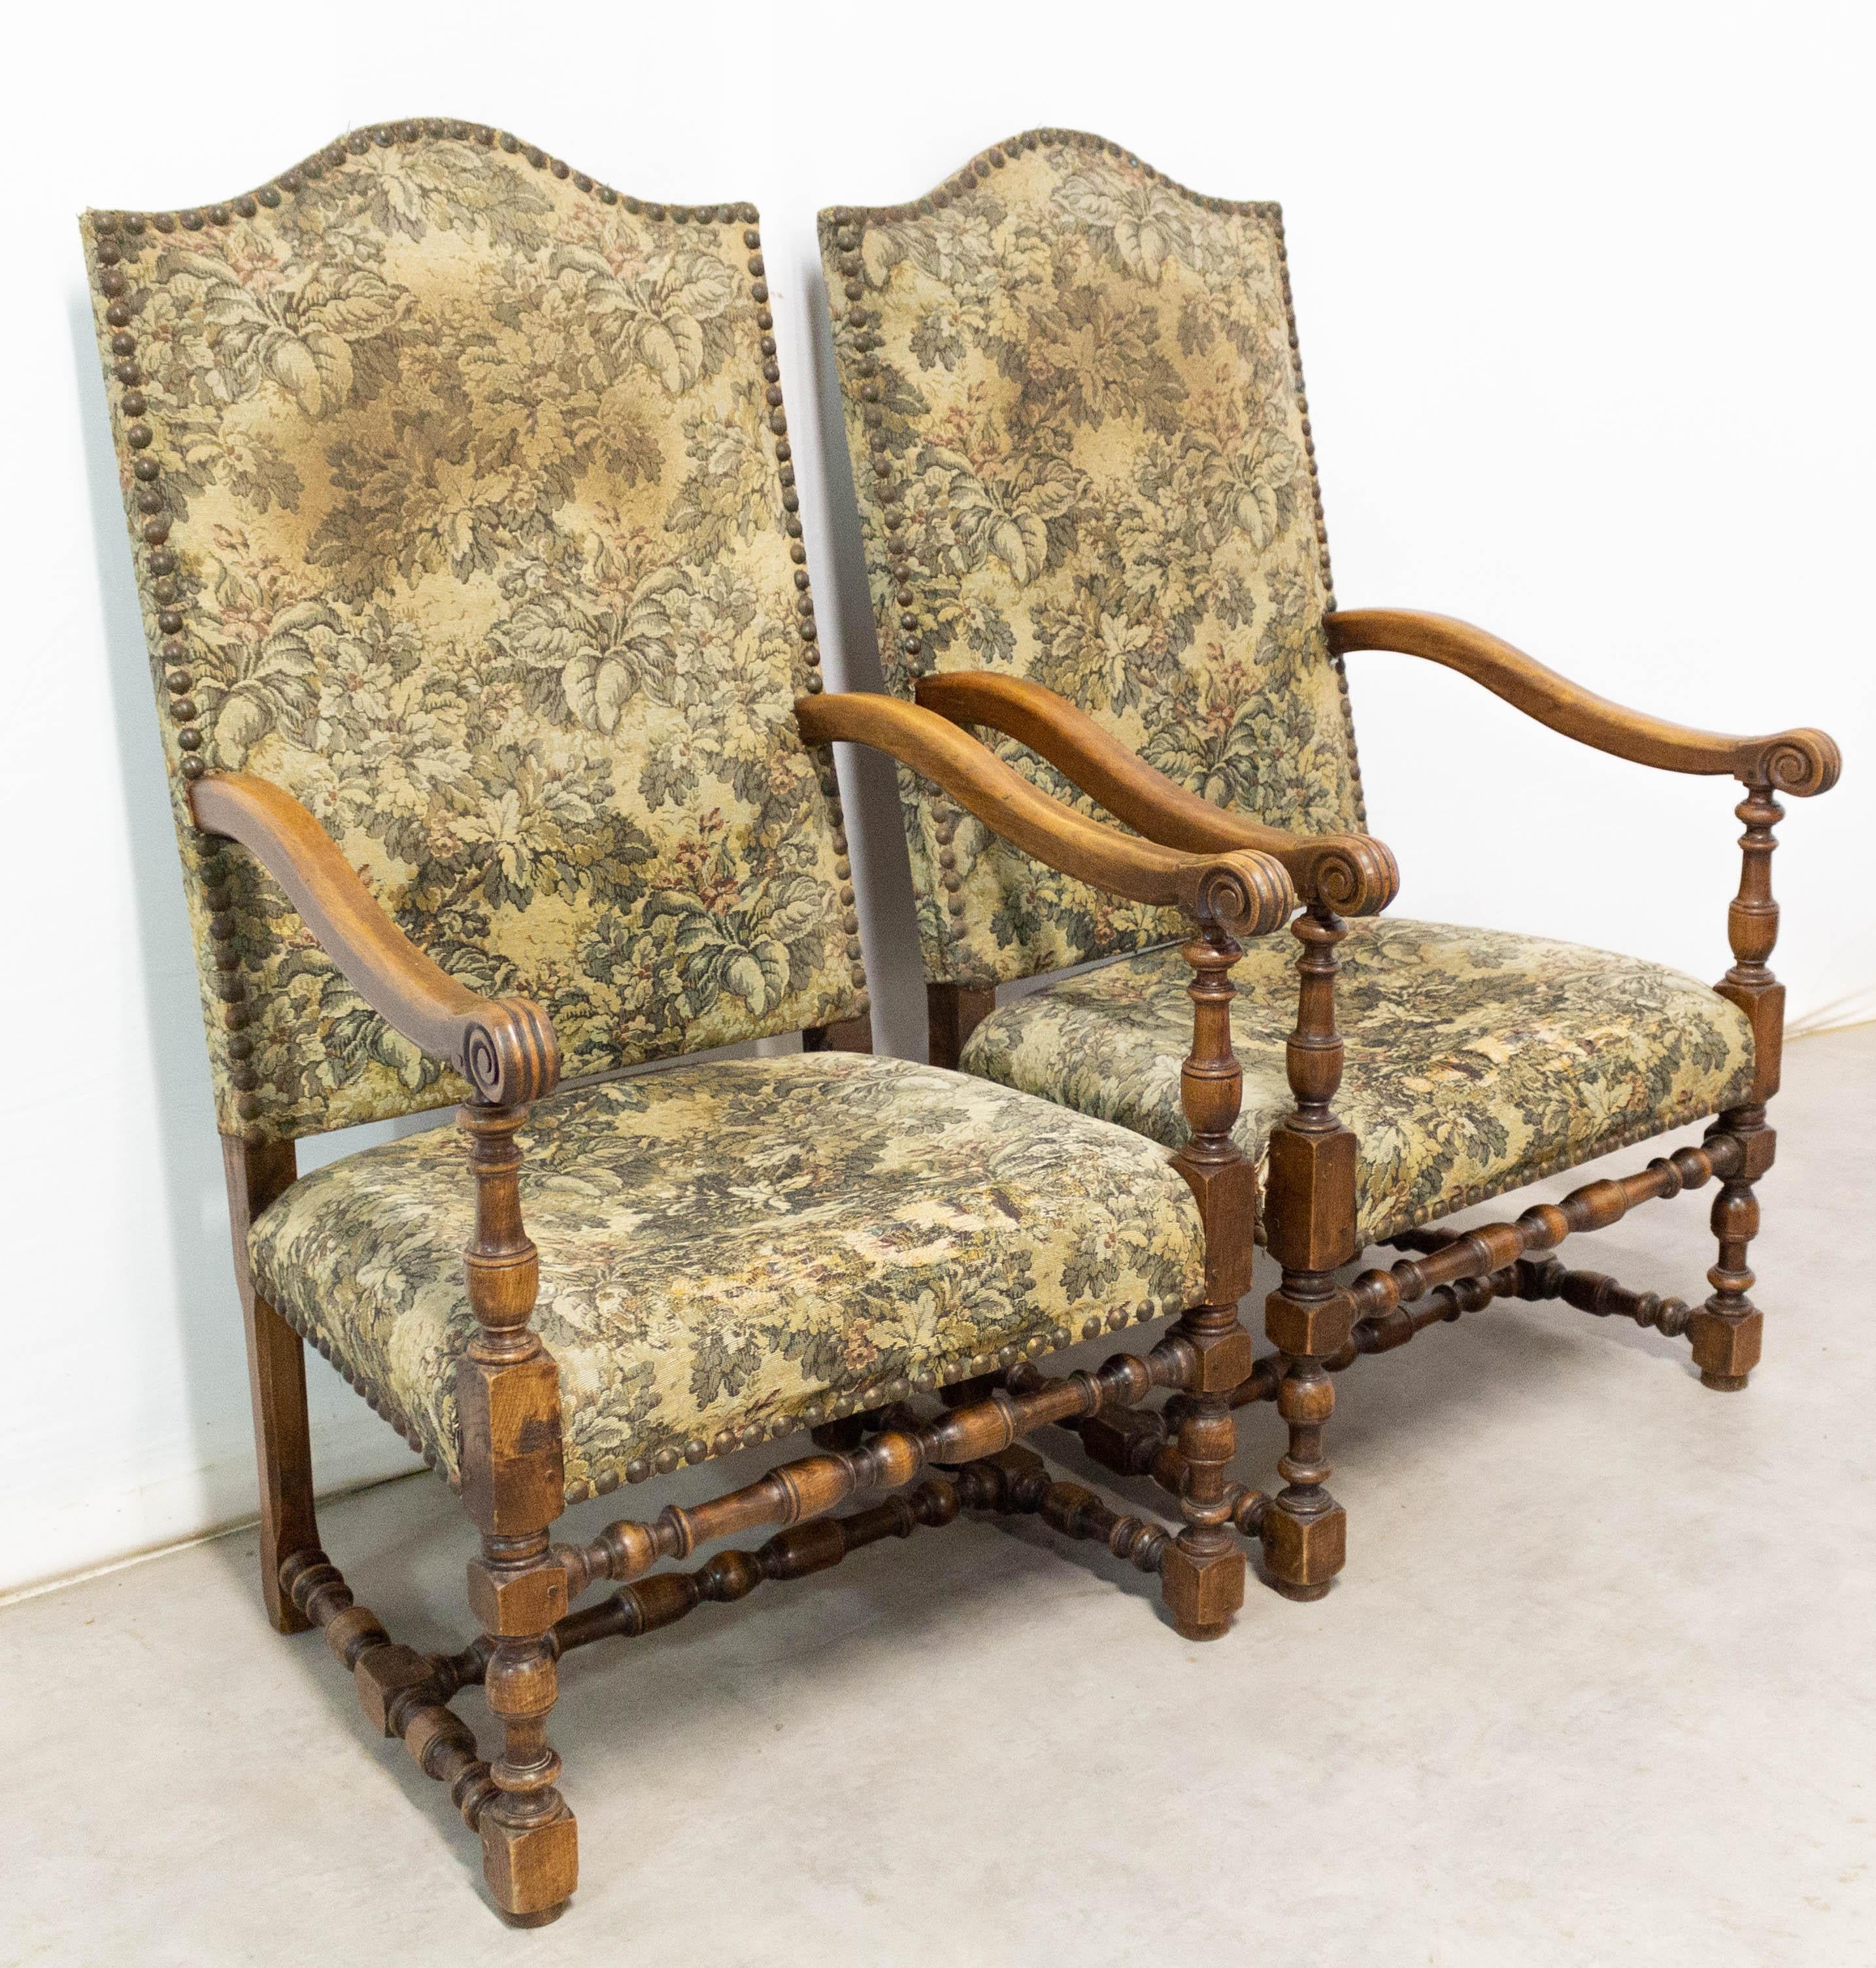 Pair of French fauteuils, open armchairs side or desk chairs Louis XIV revival,
To be re-upholstered and recovered to suit your interior
circa 1960
Good condition
Frames sound and solid.

For shipping:
64/71/120 cm 17 kg each.